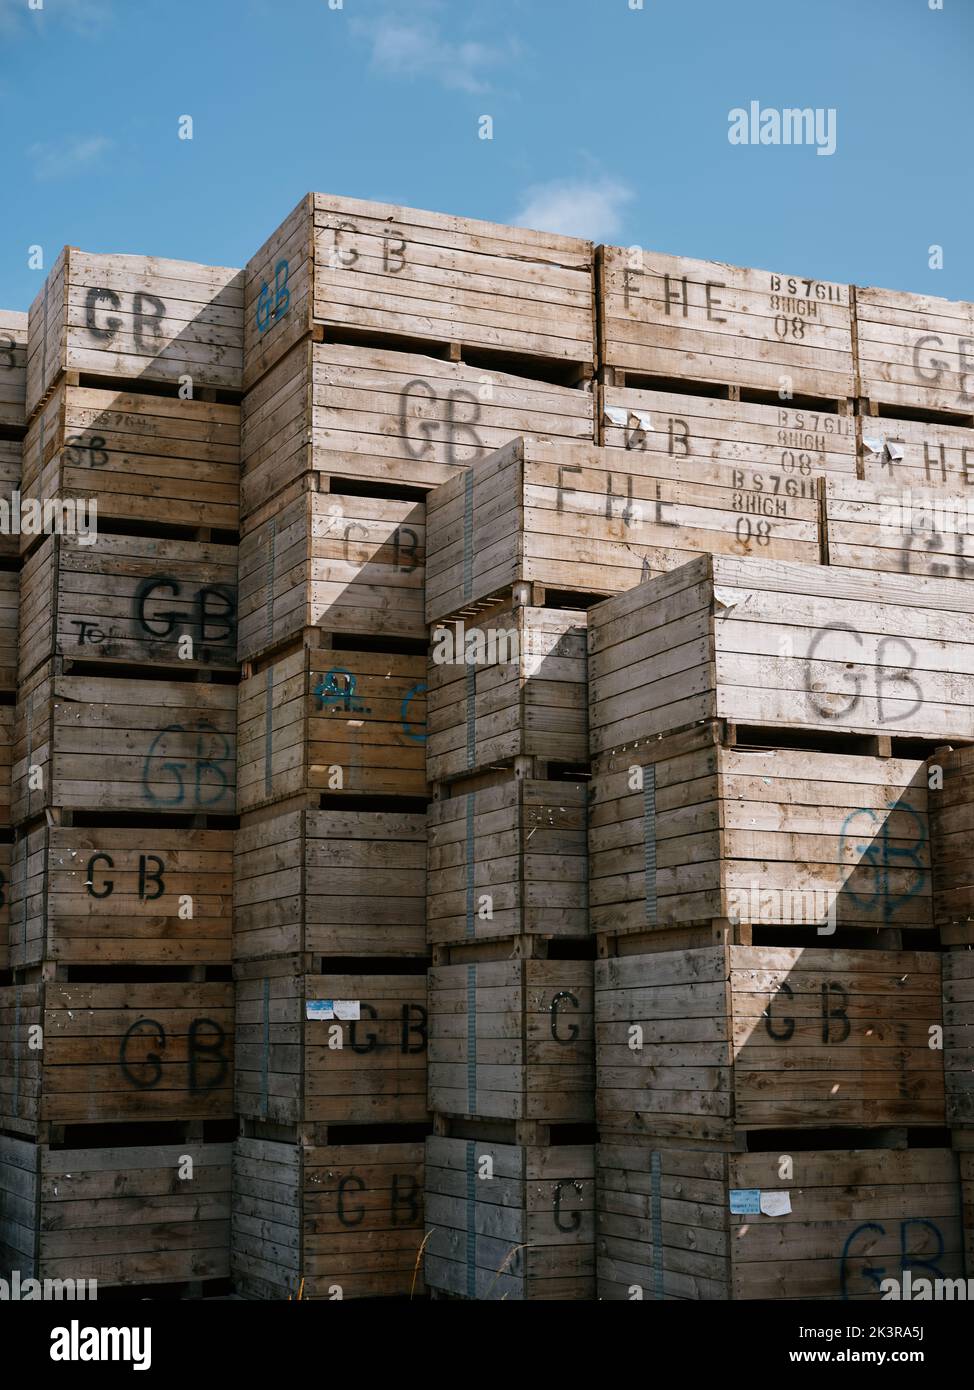 Wooden farm crates with GB identity markings stacked against a blue sky. Stock Photo